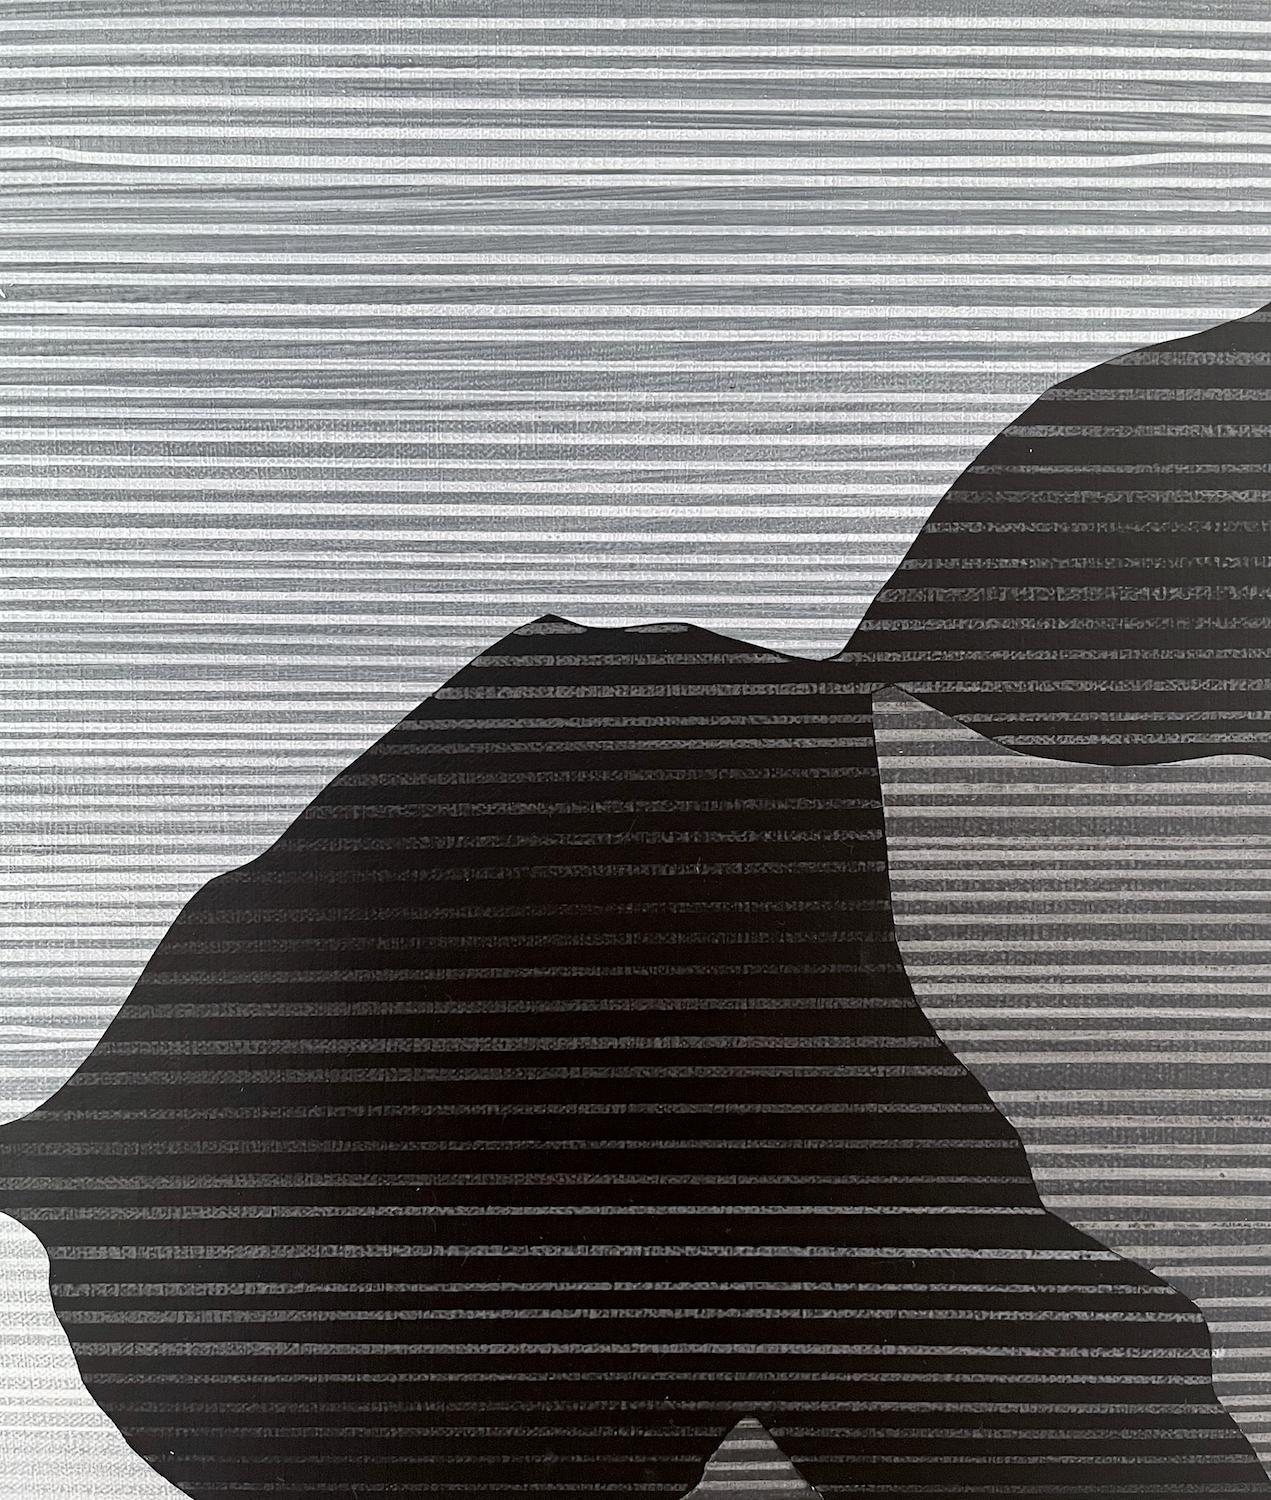 <p>Artist Comments<br>Artist Patrick Duffy displays his signature linear marks in this composition. He paints solid blocks of black and gray, mimicking the silhouette of towering mountains. Amidst the bold forms, a striking streak of white emerges,